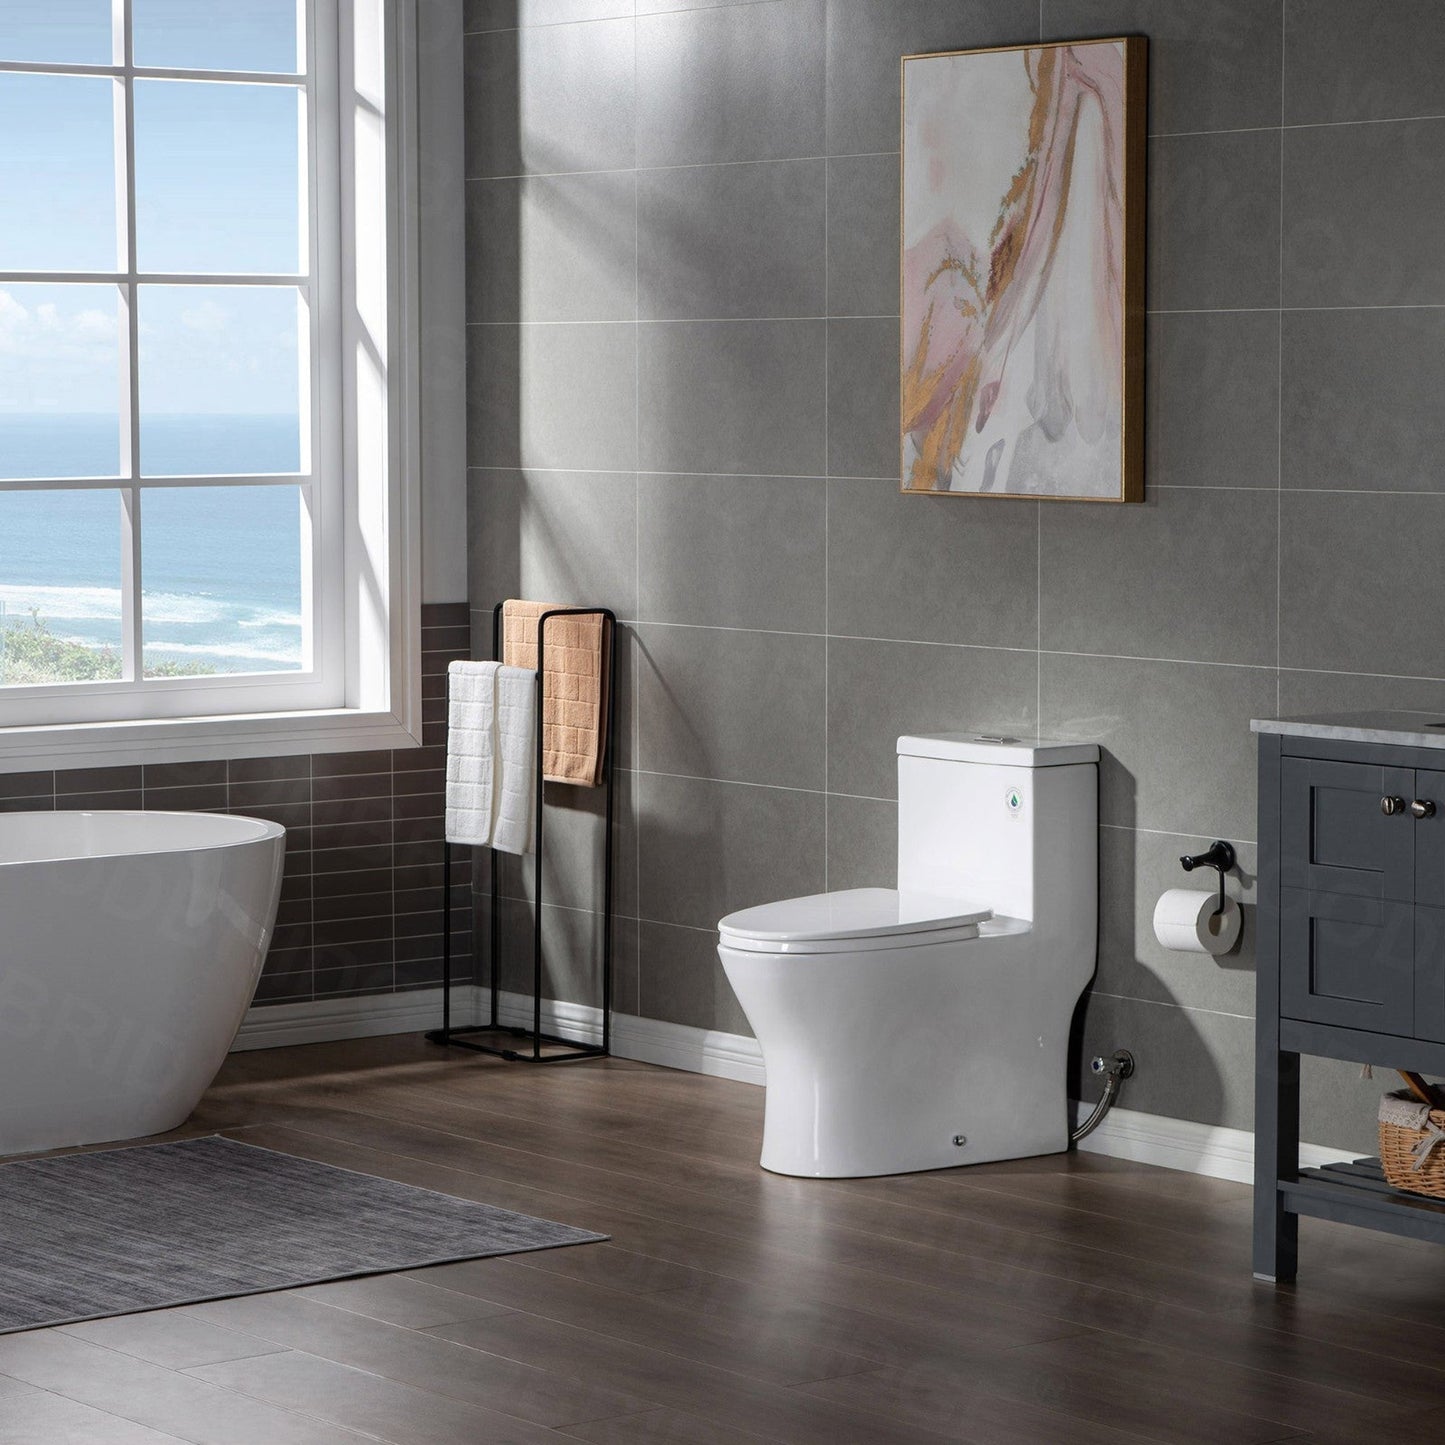 WoodBridge T0032-BN White Modern One Piece Dual Flush 1.28 GP Toilet With Soft Closing Seat and Brushed Nickel Button